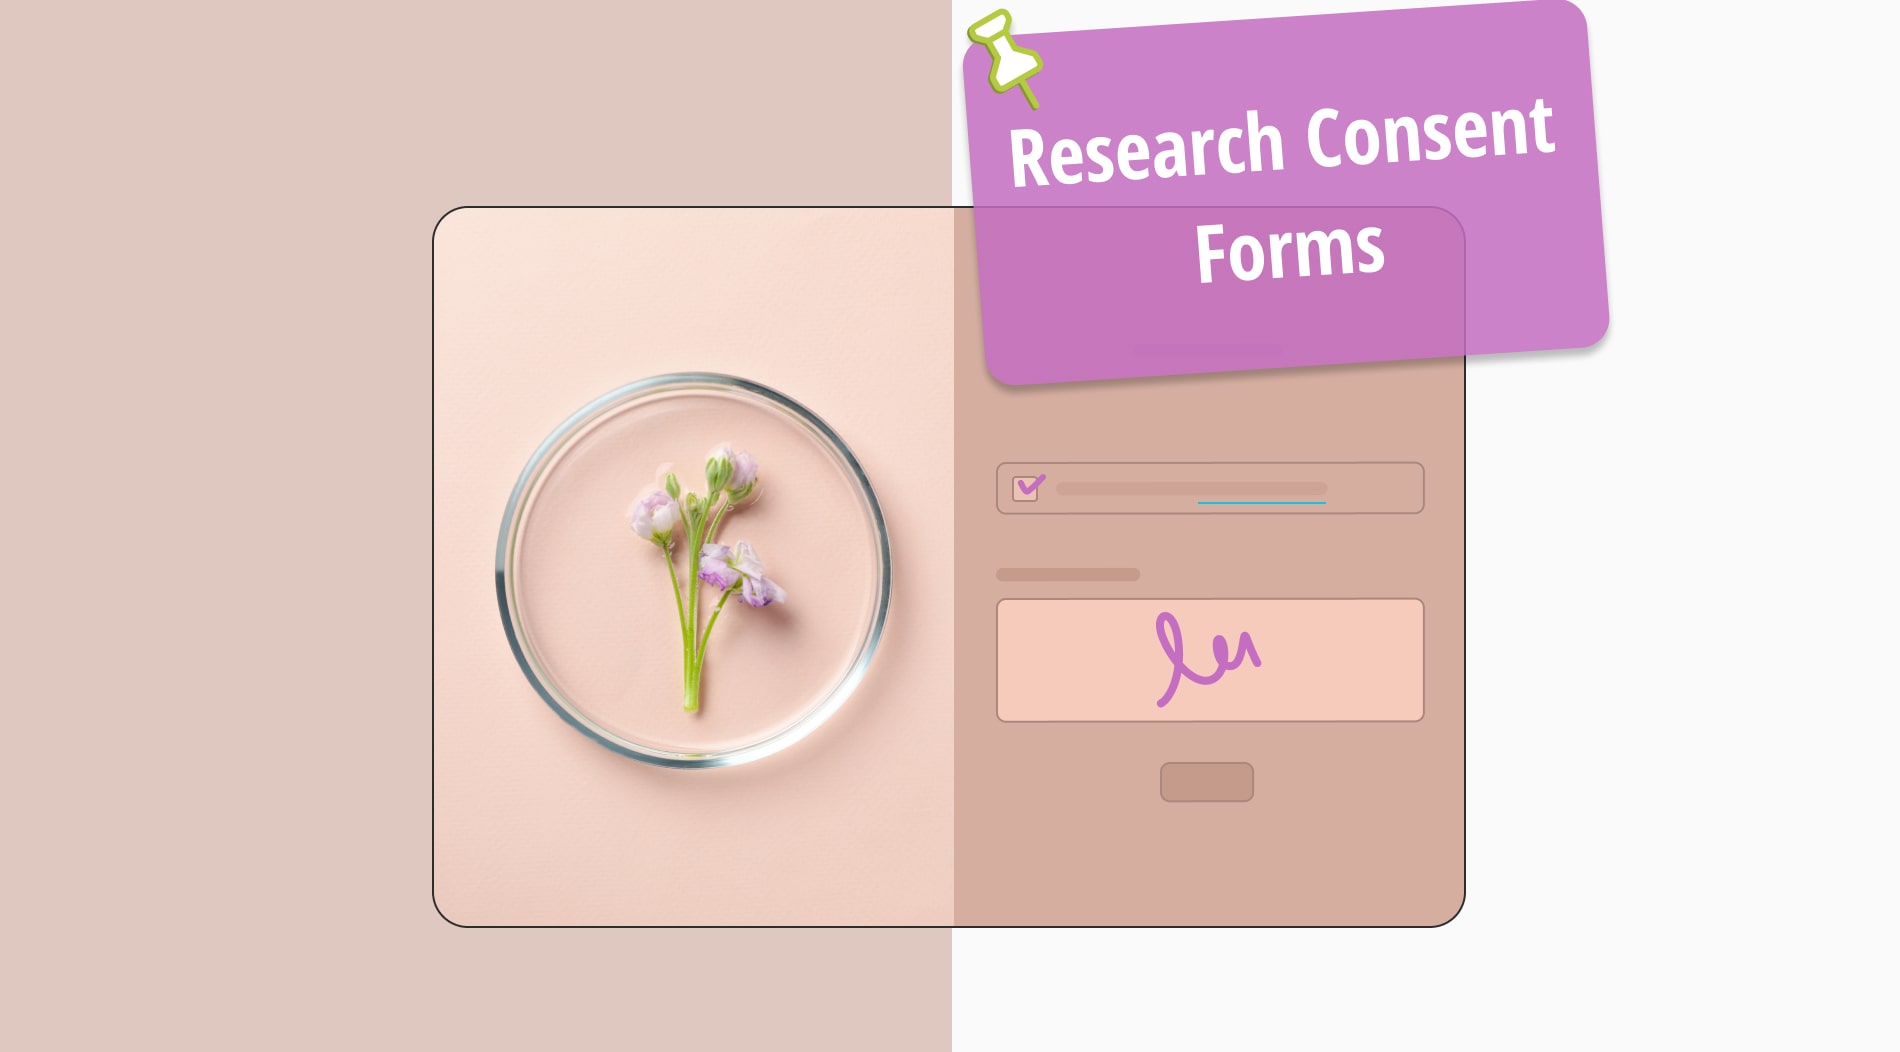 How to create an online research consent form for your research